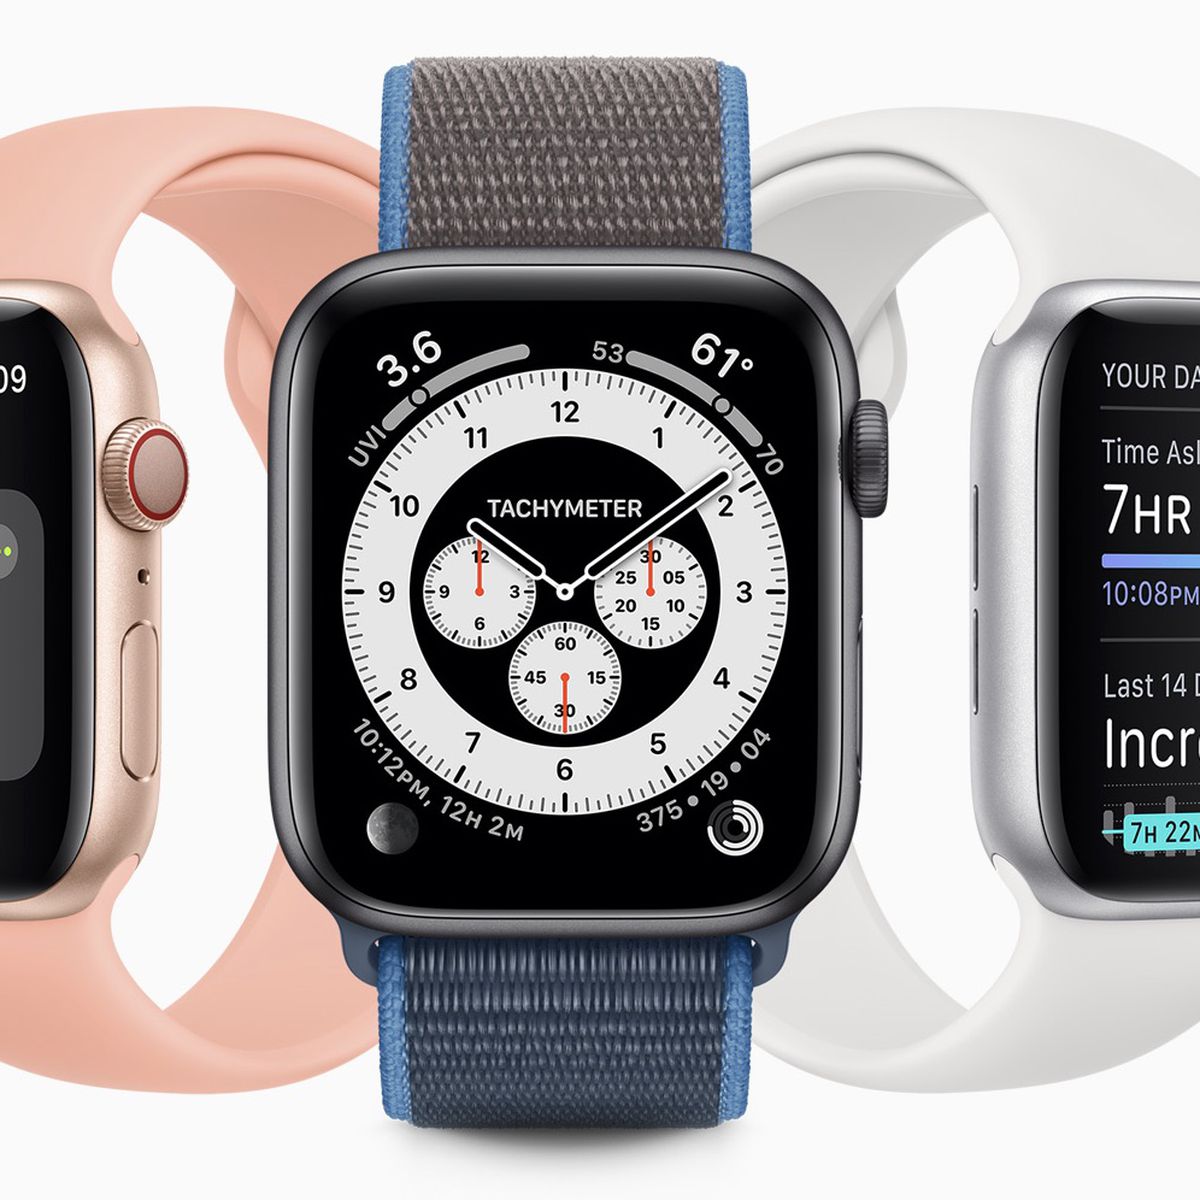 watchOS 7 Only Compatible With Apple Watch Series 3 and Later 